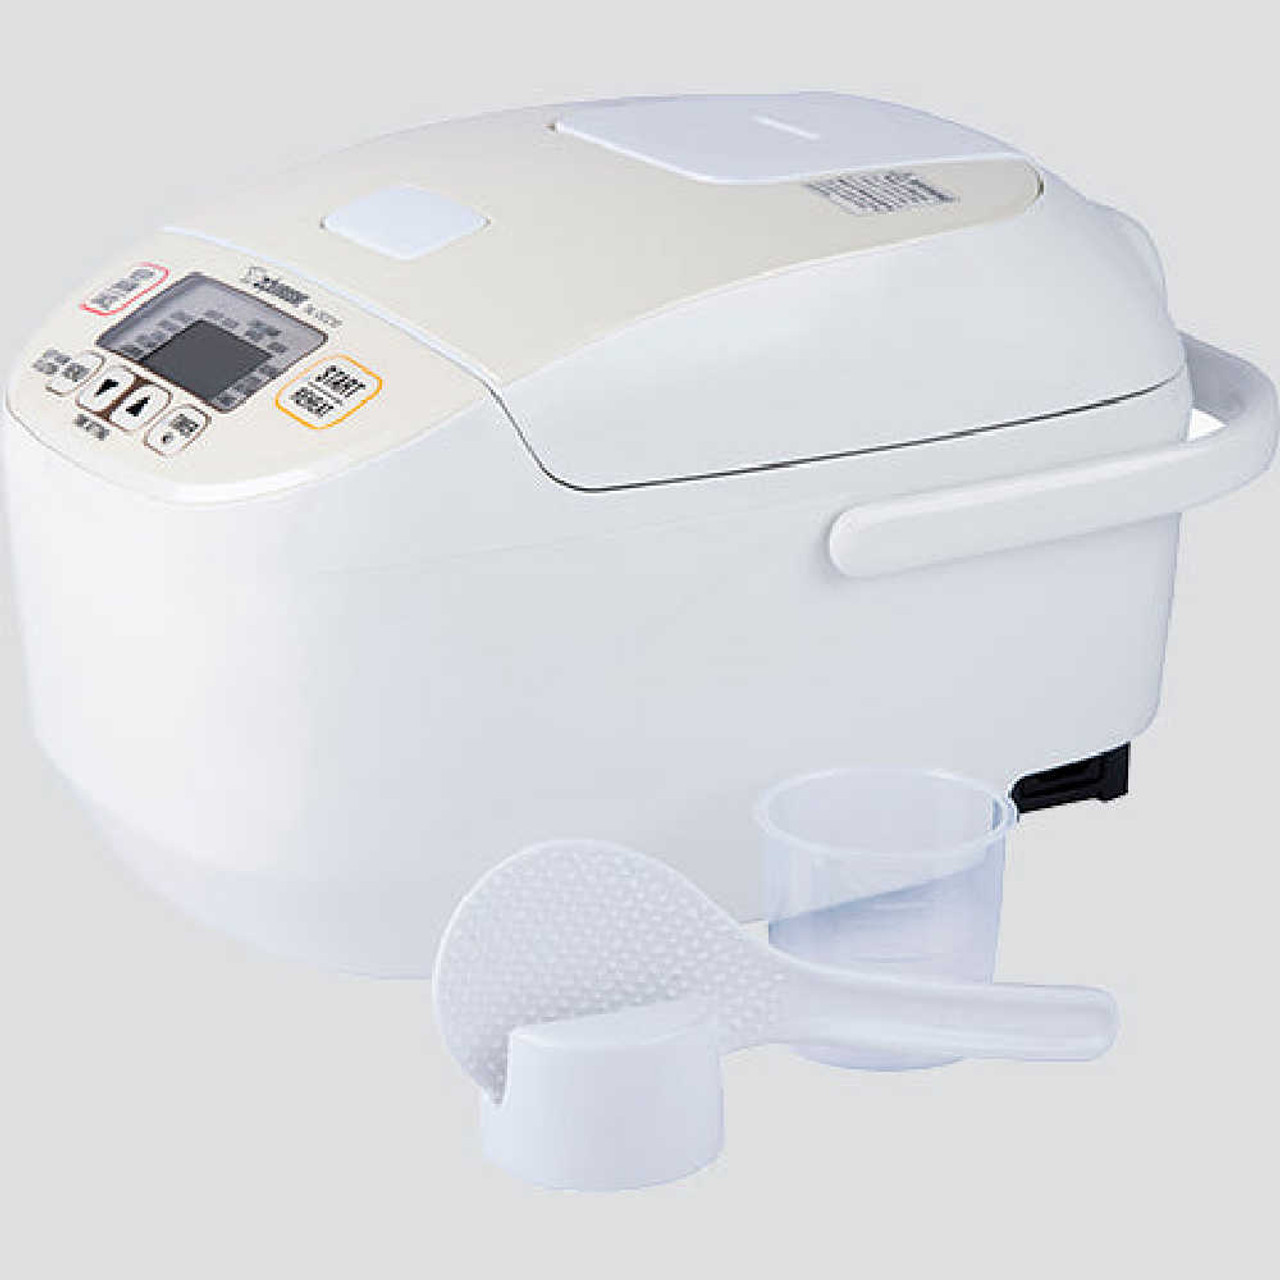 https://cdn11.bigcommerce.com/s-hccytny0od/images/stencil/1280x1280/products/4516/18071/Zojirushi_Micom_5.5-Cup_Rice_Cooker_and_Warmer_1__14851.1646704512.jpg?c=2?imbypass=on